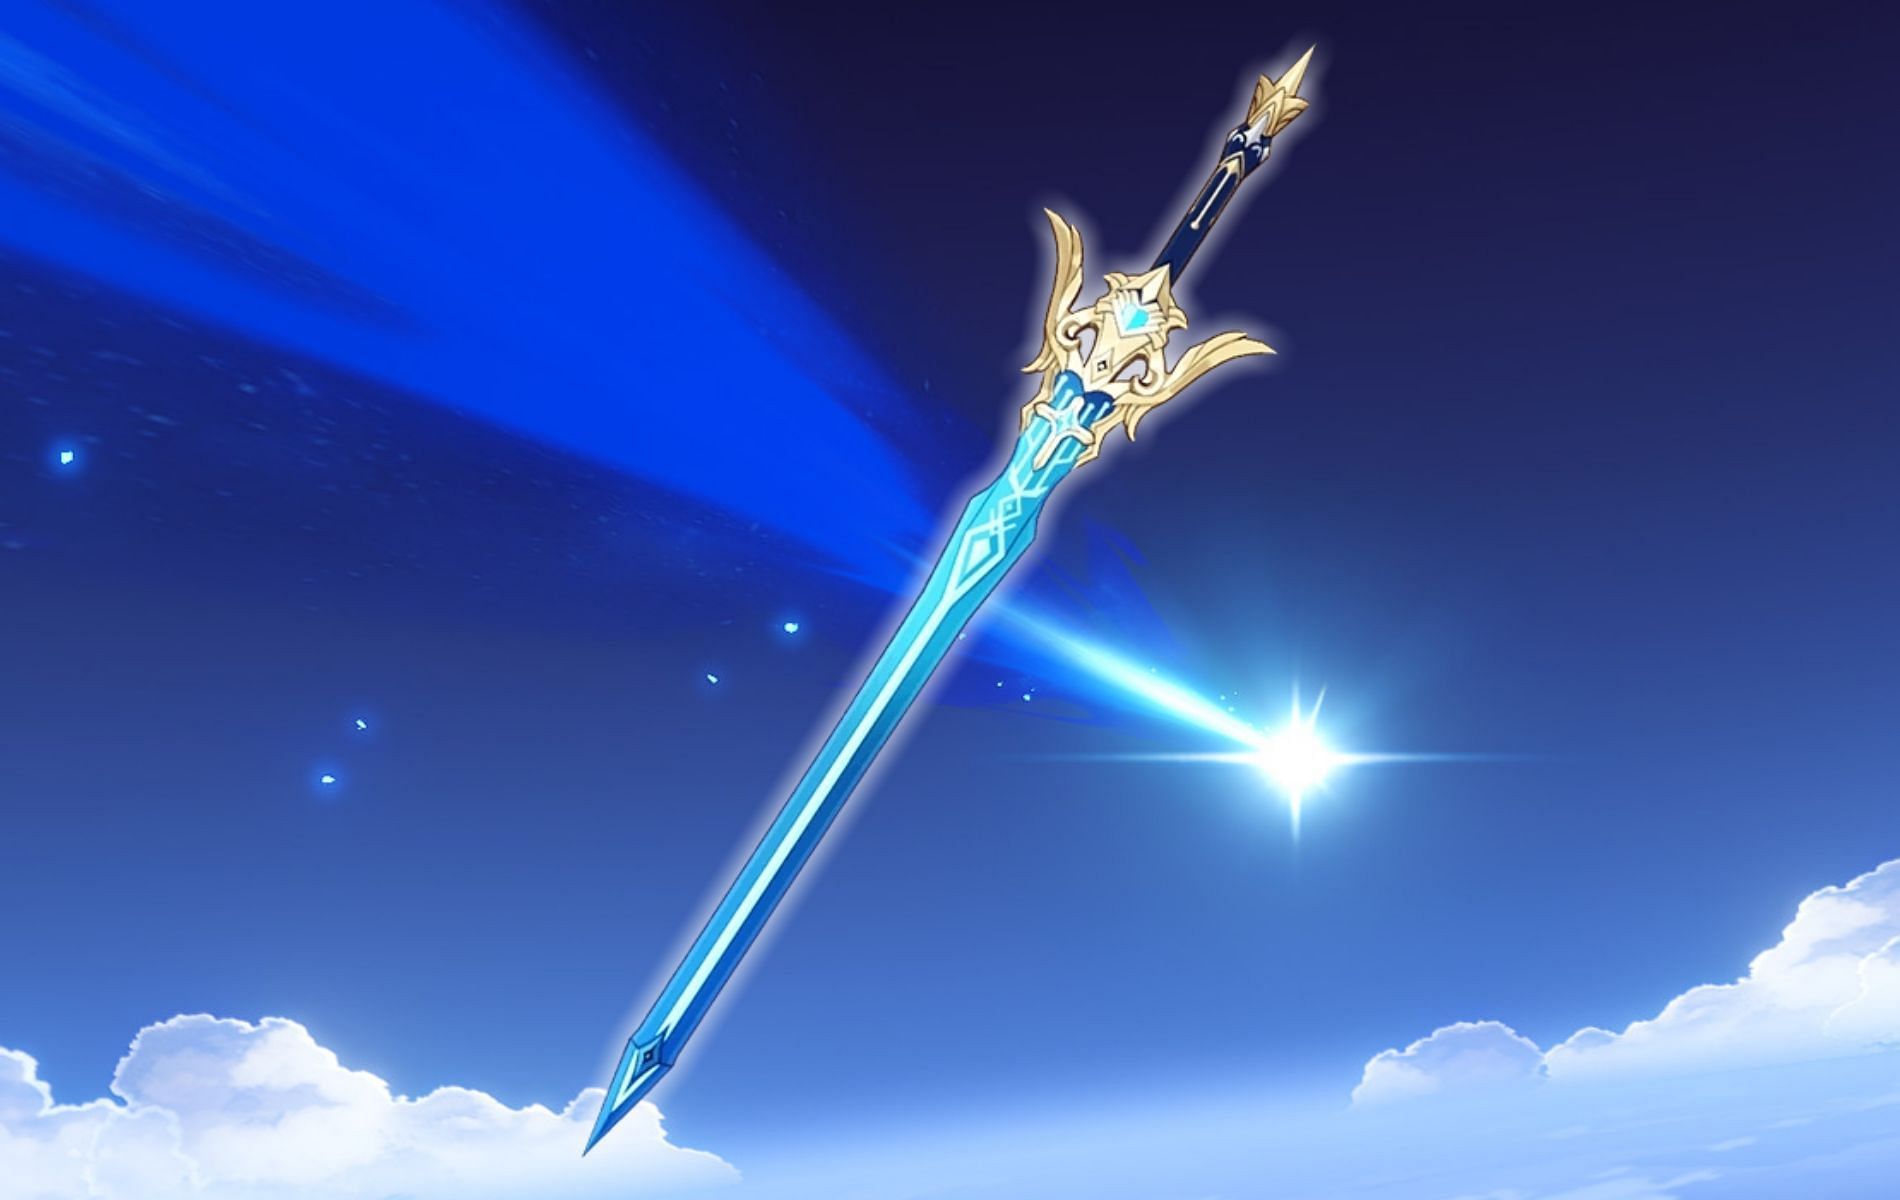 Freedom Sworn is a rare five-star sword, only featured once previously (Image via Genshin impact)